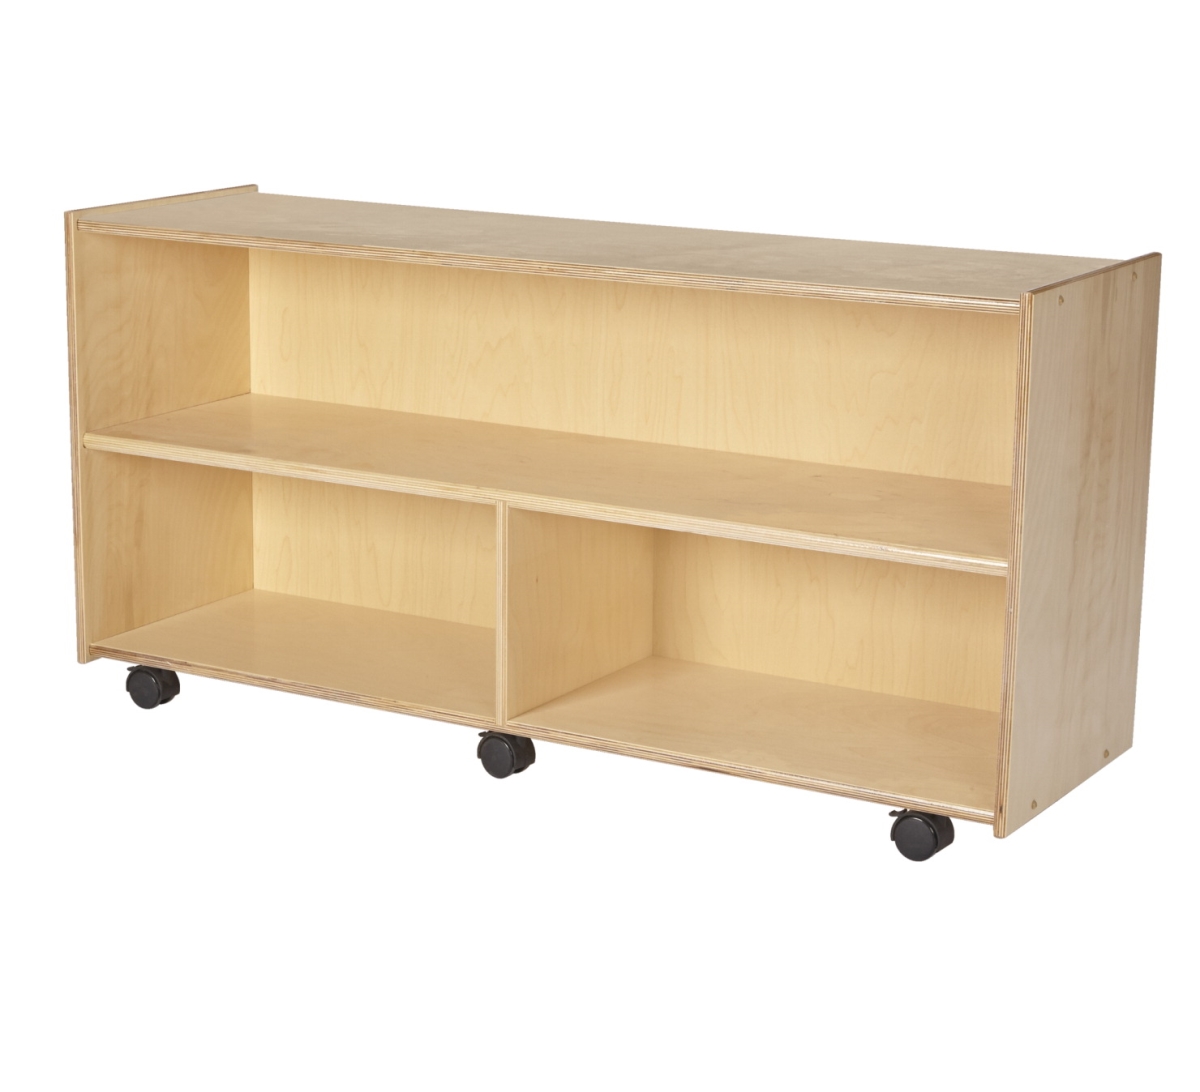 1558435 47.75 X 14.25 X 24 In. Mobile Compartment Storage Units With Locking Casters